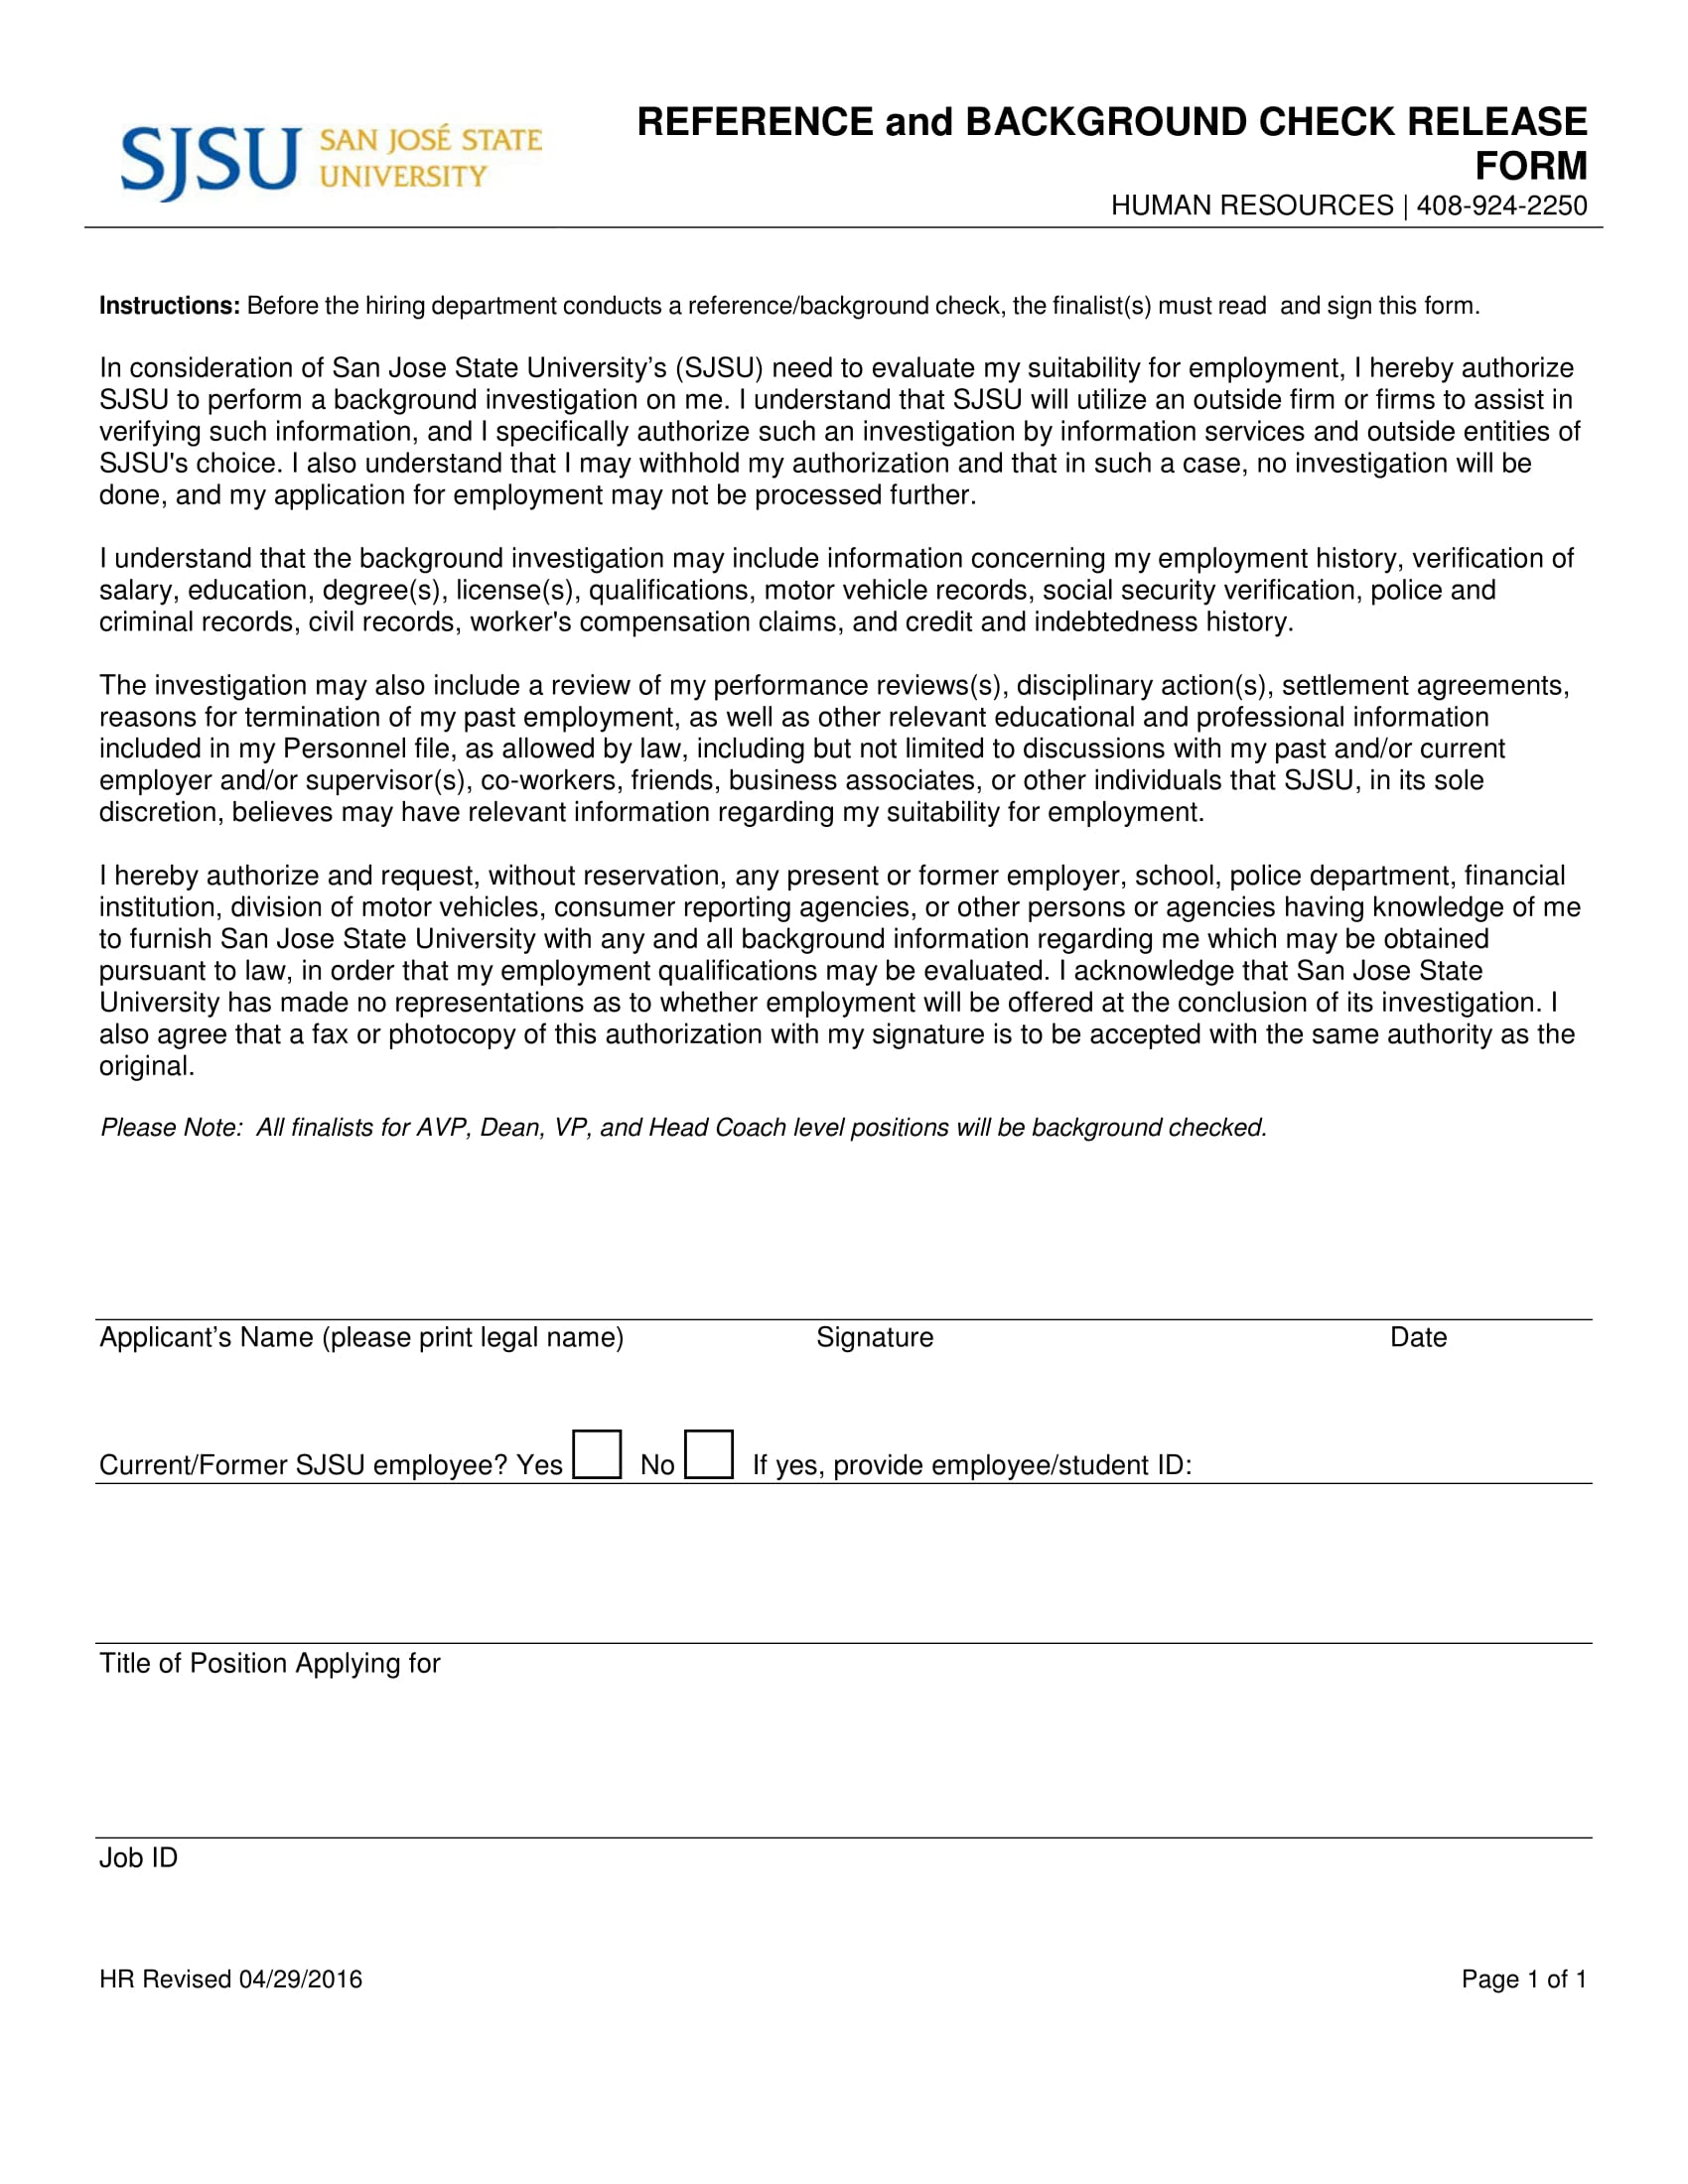 reference background check release form 1